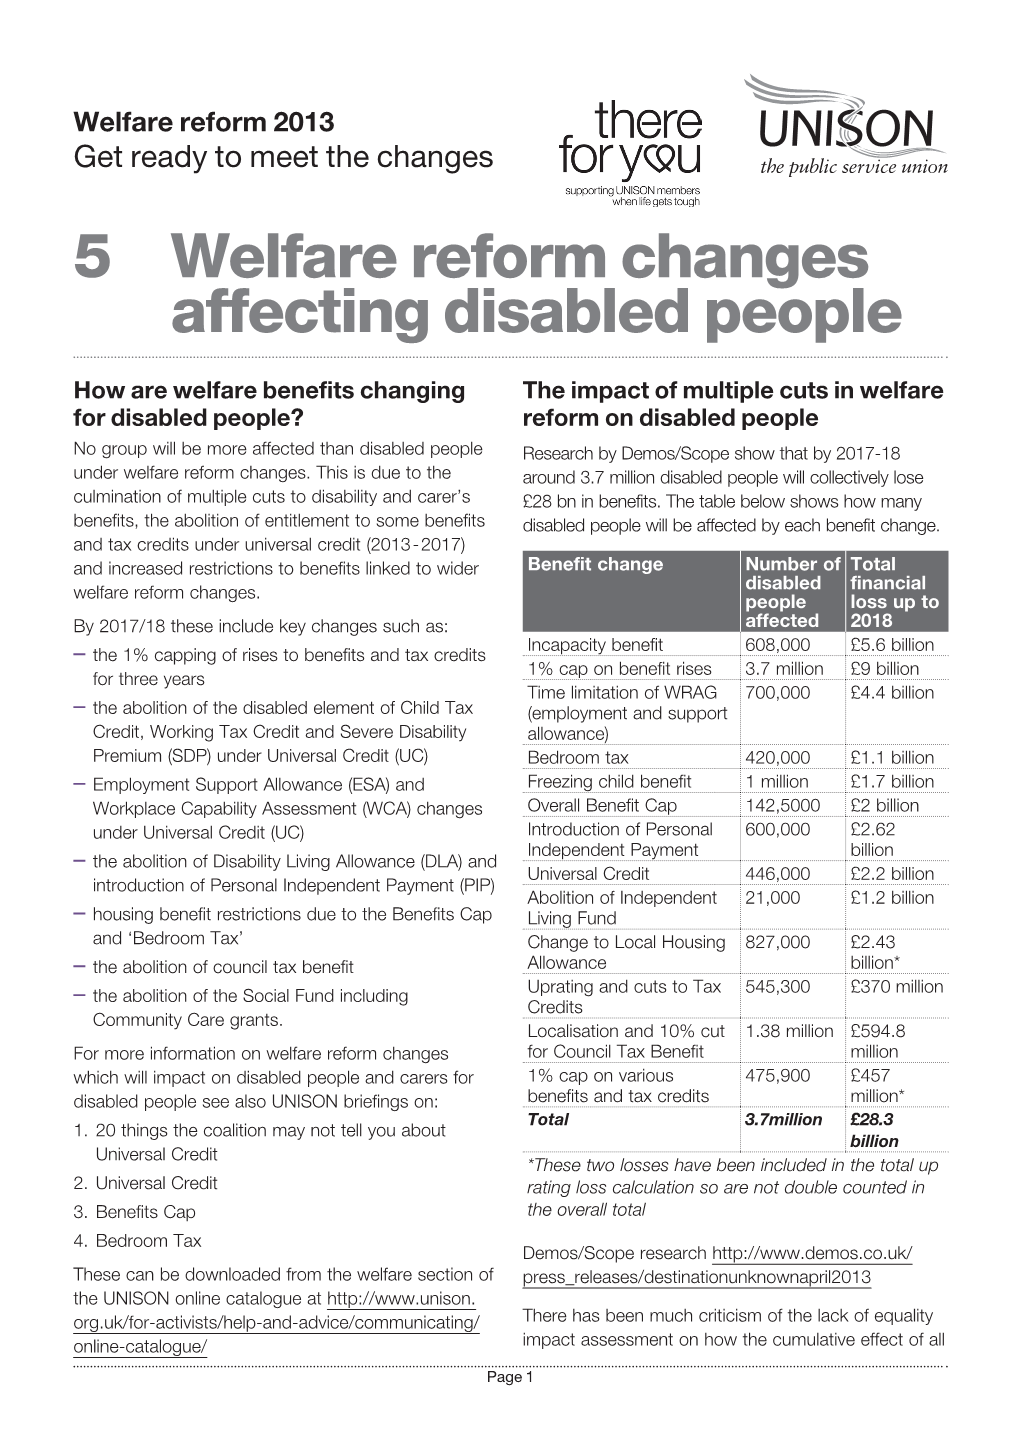 5 Welfare Reform Changes Affecting Disabled People